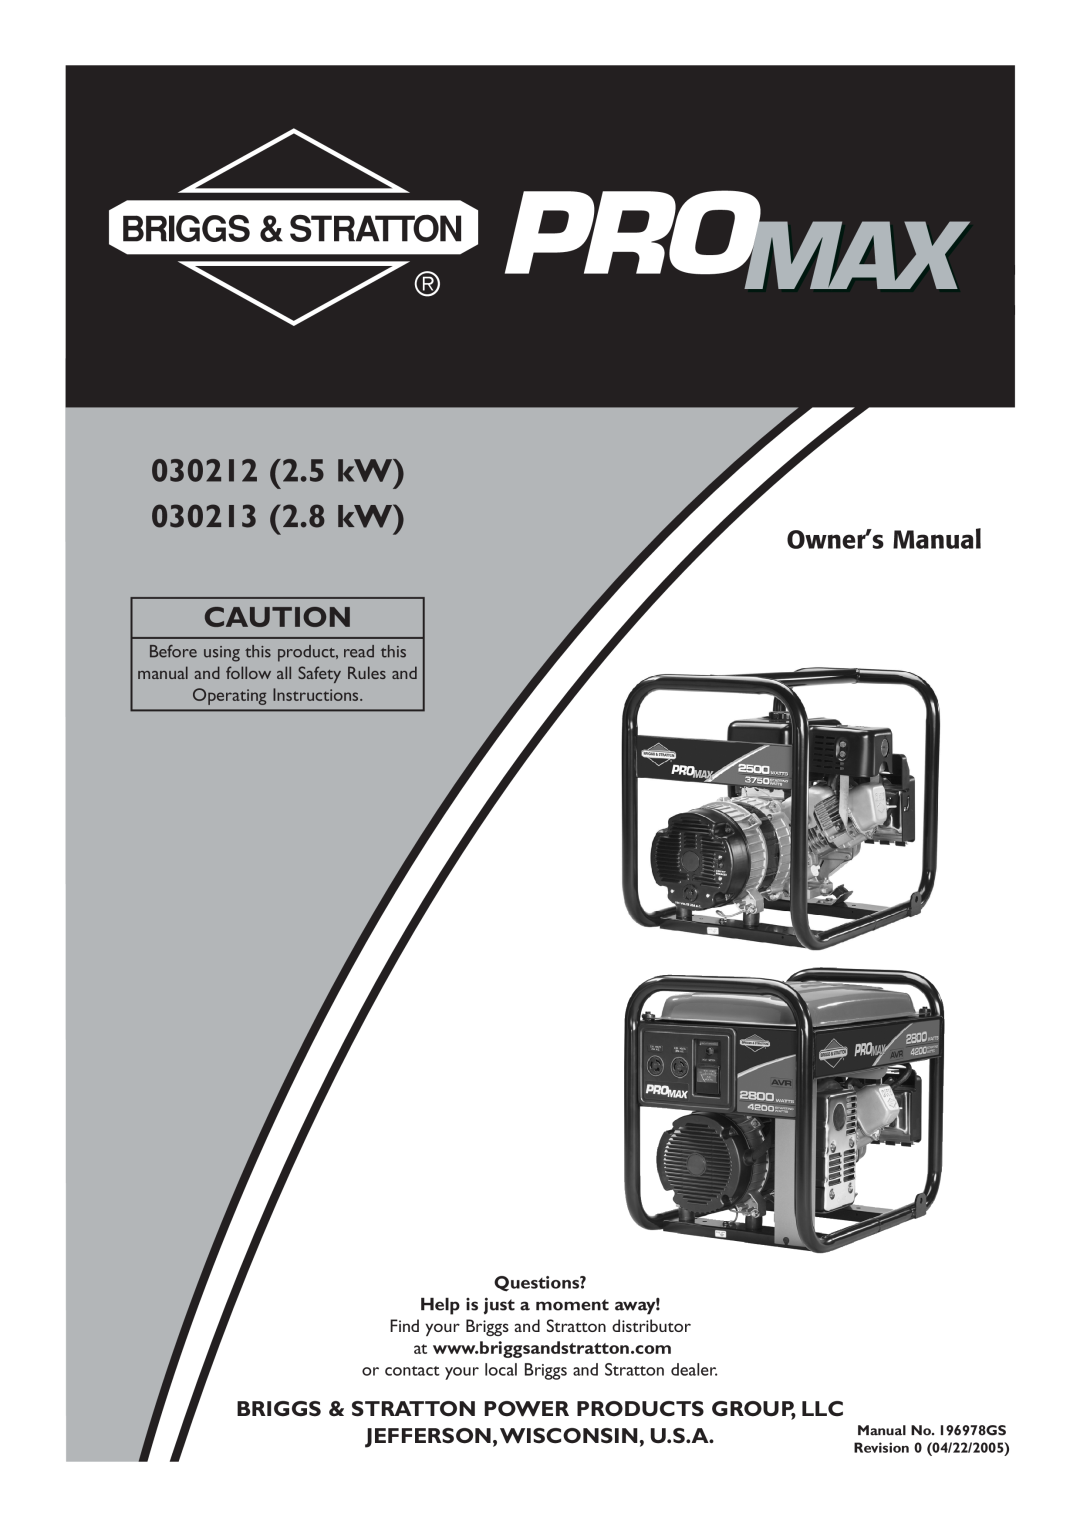 Briggs & Stratton owner manual 030212 2.5 kW 030213 2.8 kW, Briggs & Stratton Power Products Group, Llc, Owner’s Manual 